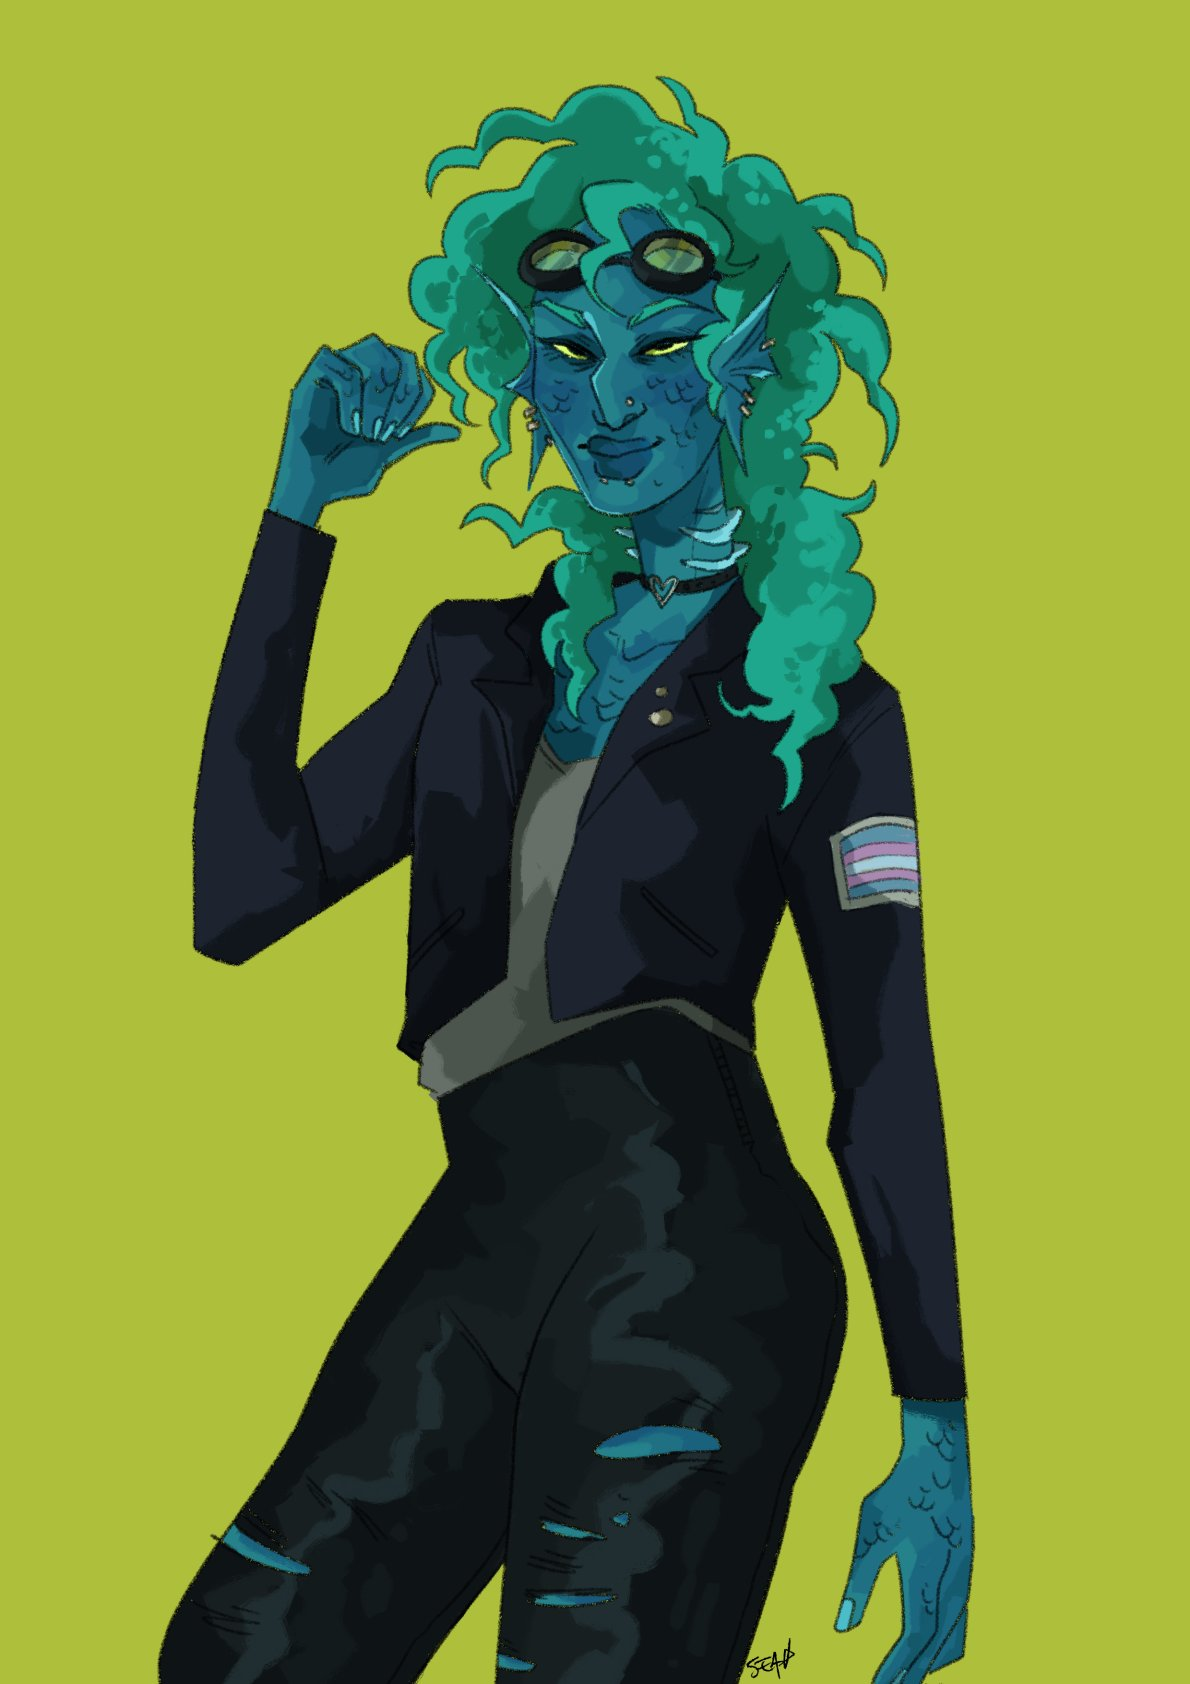 A digital illustration of Ver'million Blue, depicted with blue skin. She's wearing ripped leather pants, a black choker, goggles pushed up on her head, and a leather jacket with a trans pride flag patch on the arm.